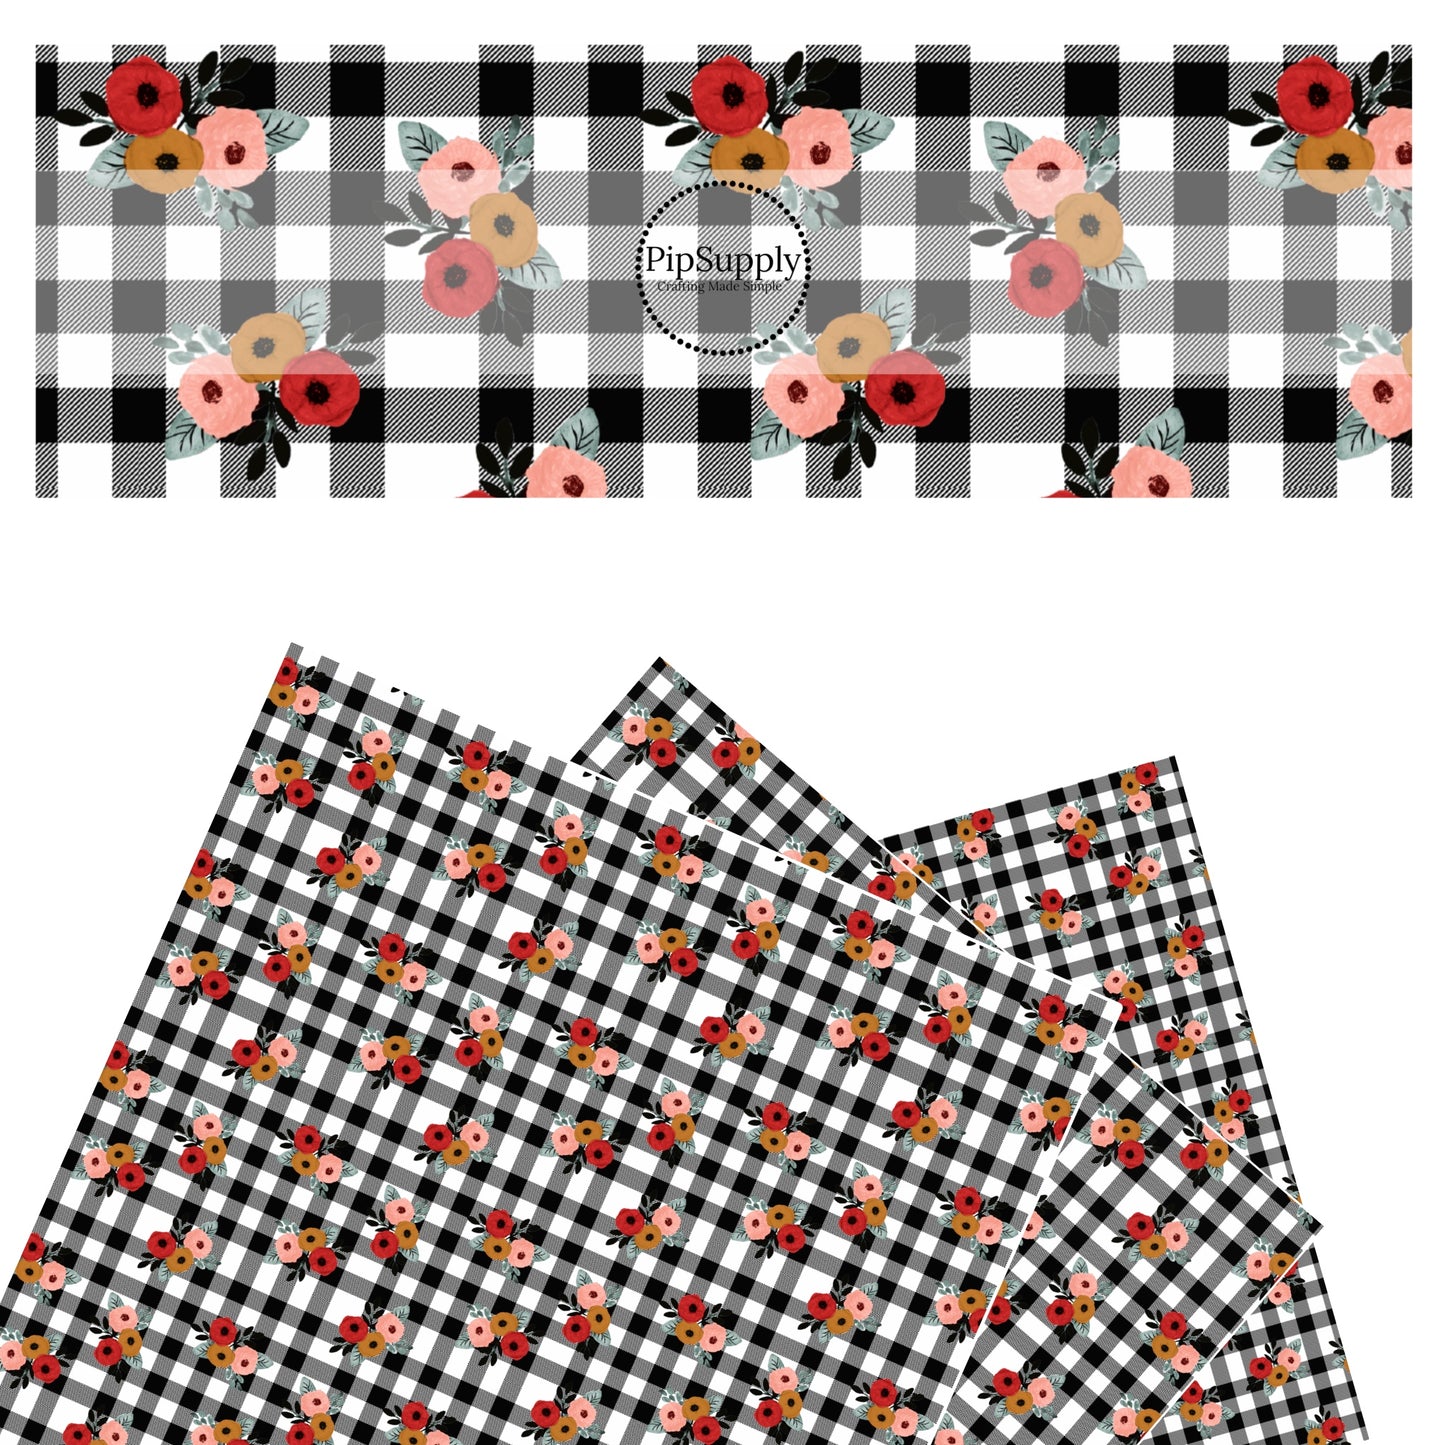 These fall themed checker pattern faux leather sheets contain the following design elements: black and white checker pattern with floral red, brown, and light pink flowers. Our CPSIA compliant faux leather sheets or rolls can be used for all types of crafting projects.